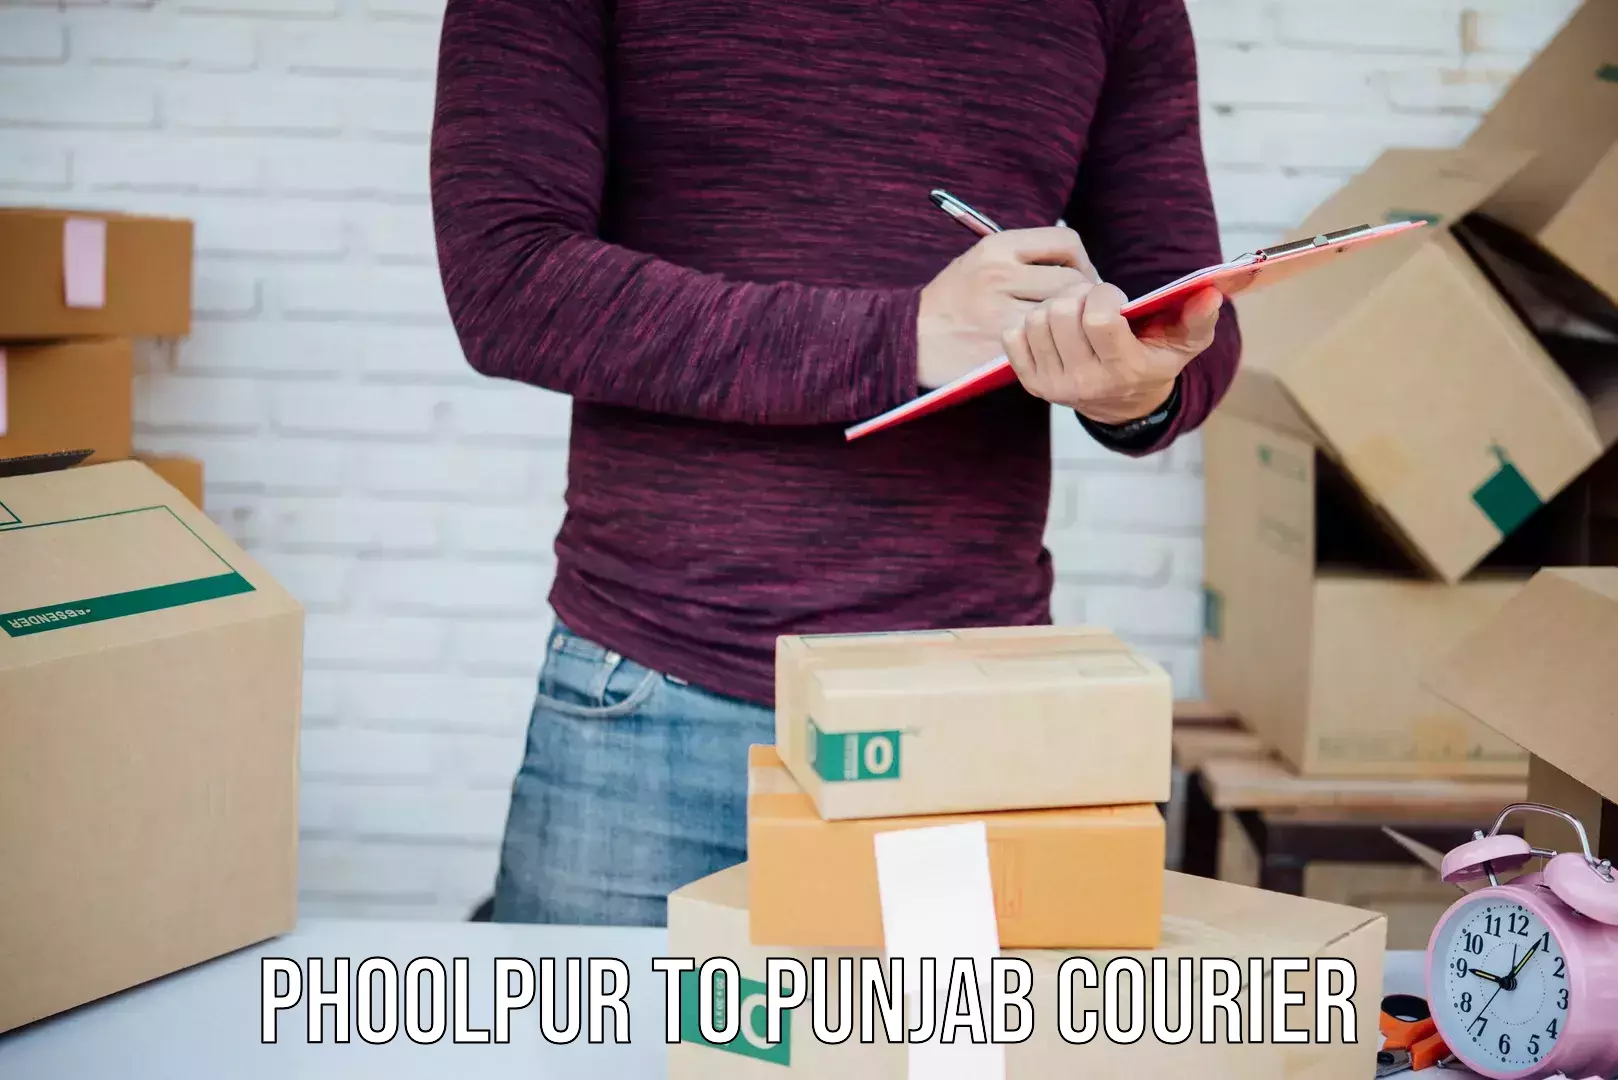 Global courier networks Phoolpur to Central University of Punjab Bathinda